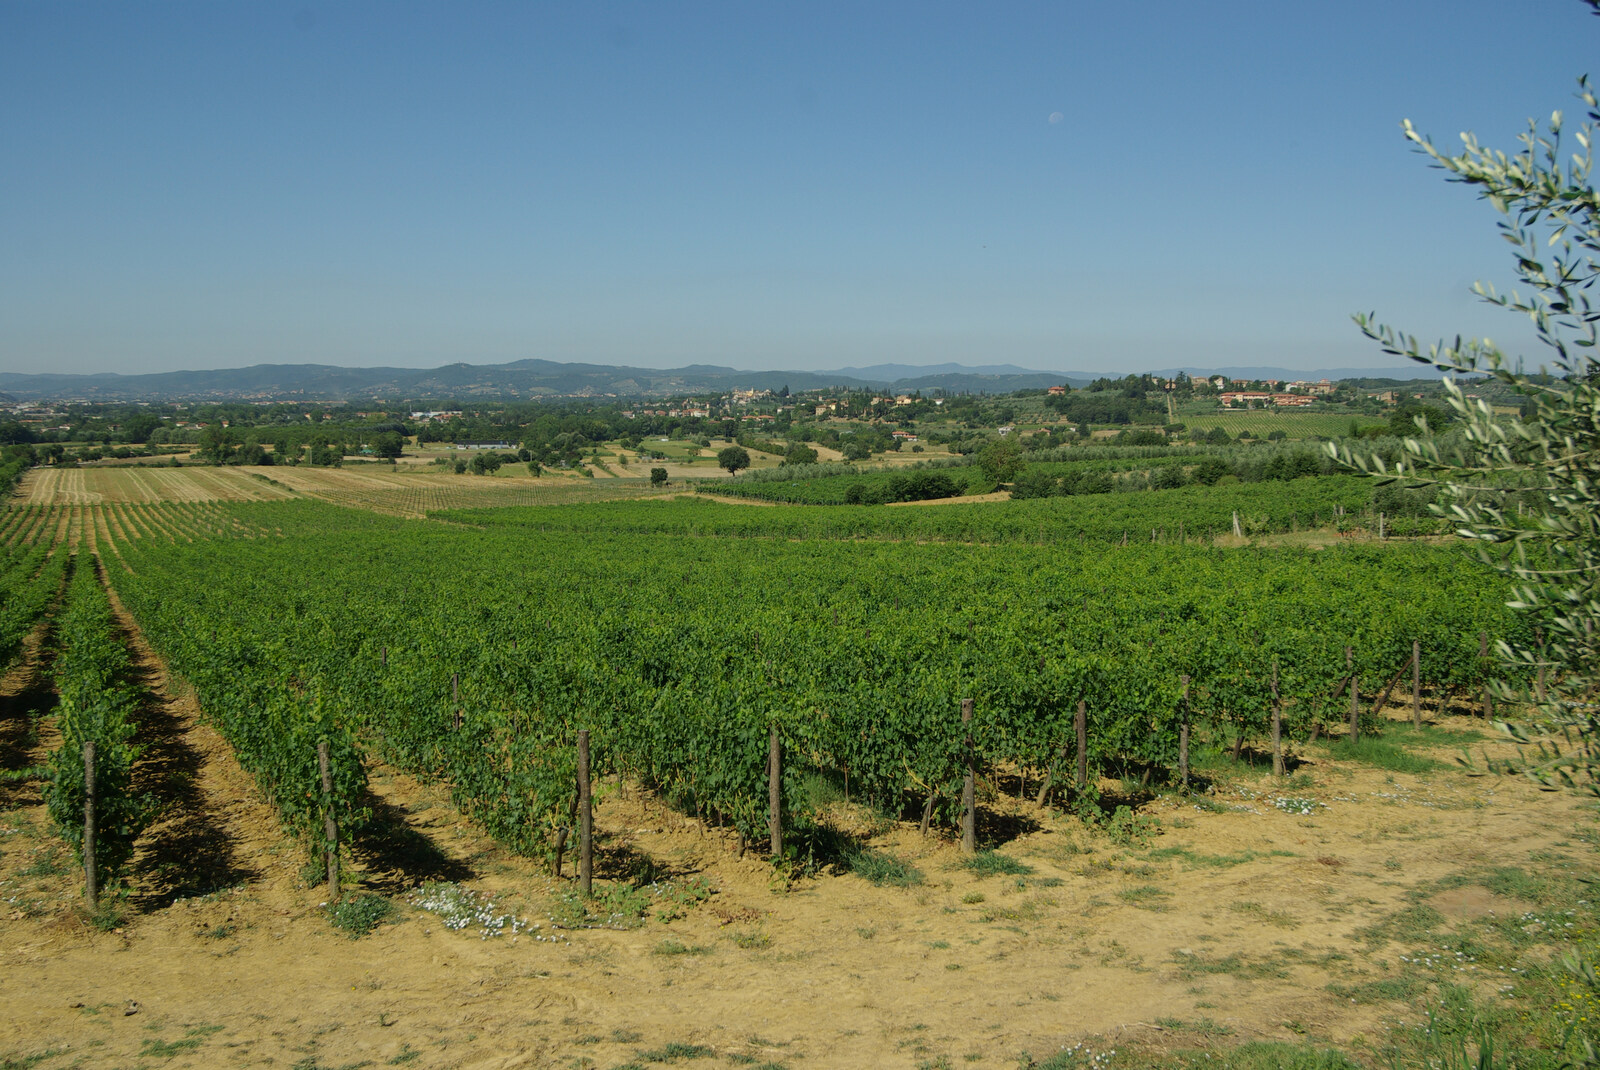 The view over the vineyards, as seen from the car park from Tenuta Il Palazzo in Arezzo, Tuscany, Italy - 22nd July 2008